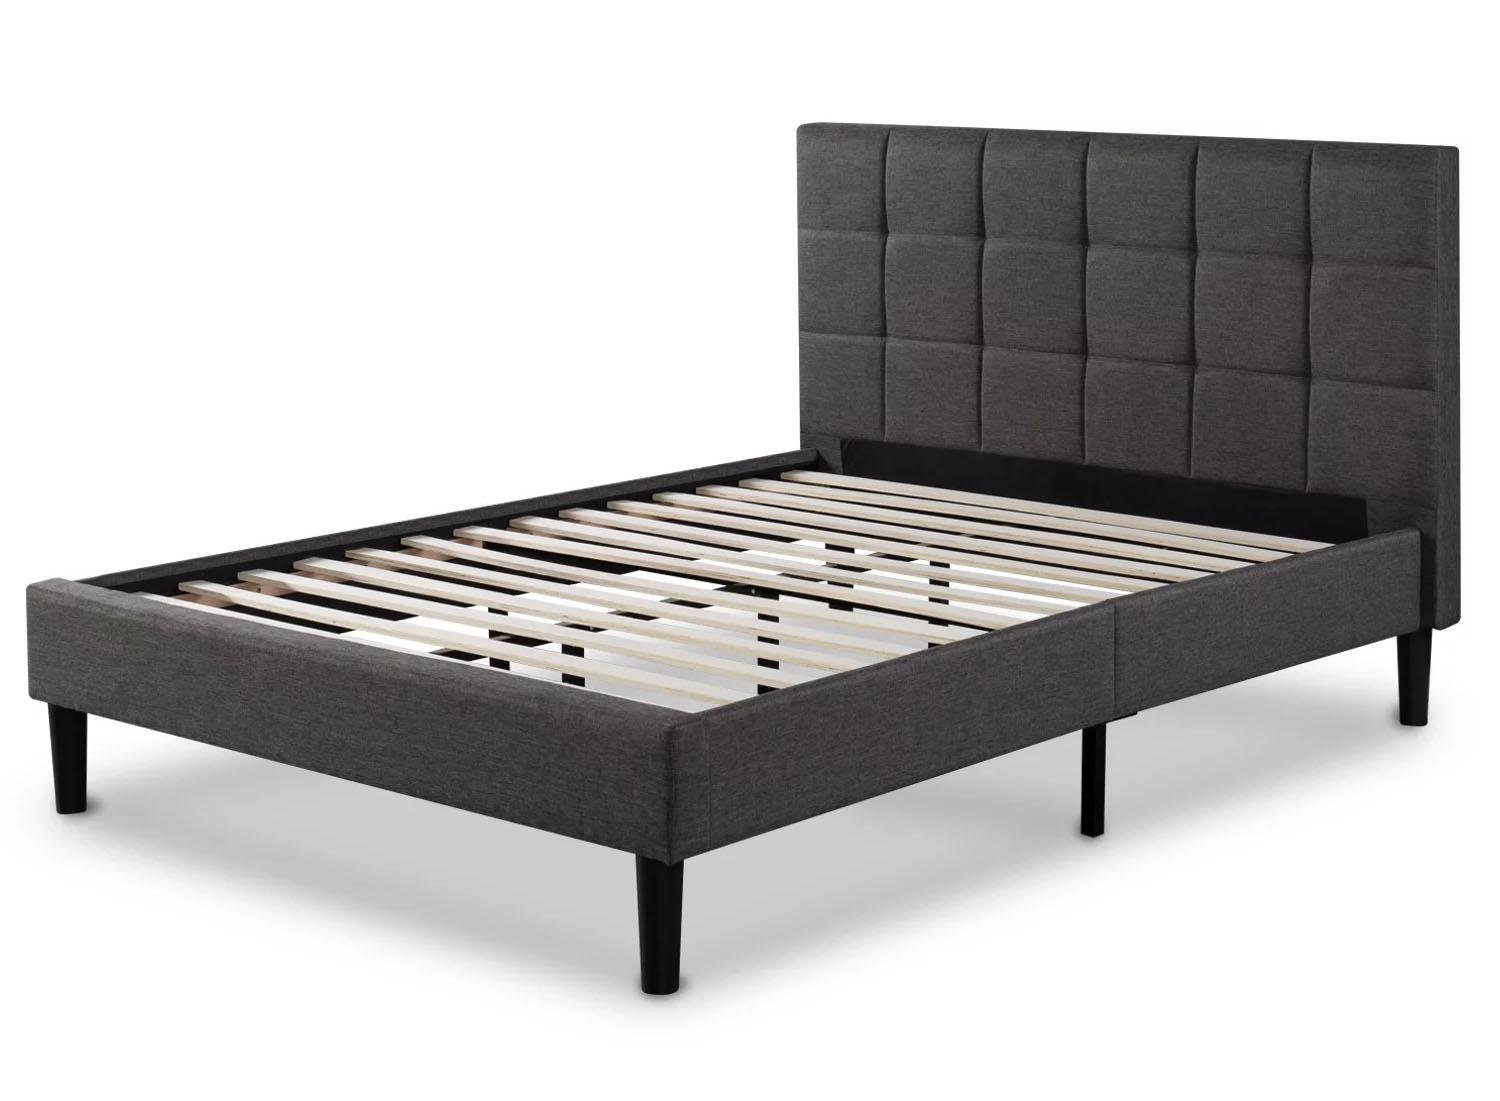 Zinus Lottie Upholstered Standard Queen Bed Frame for $99 Shipped